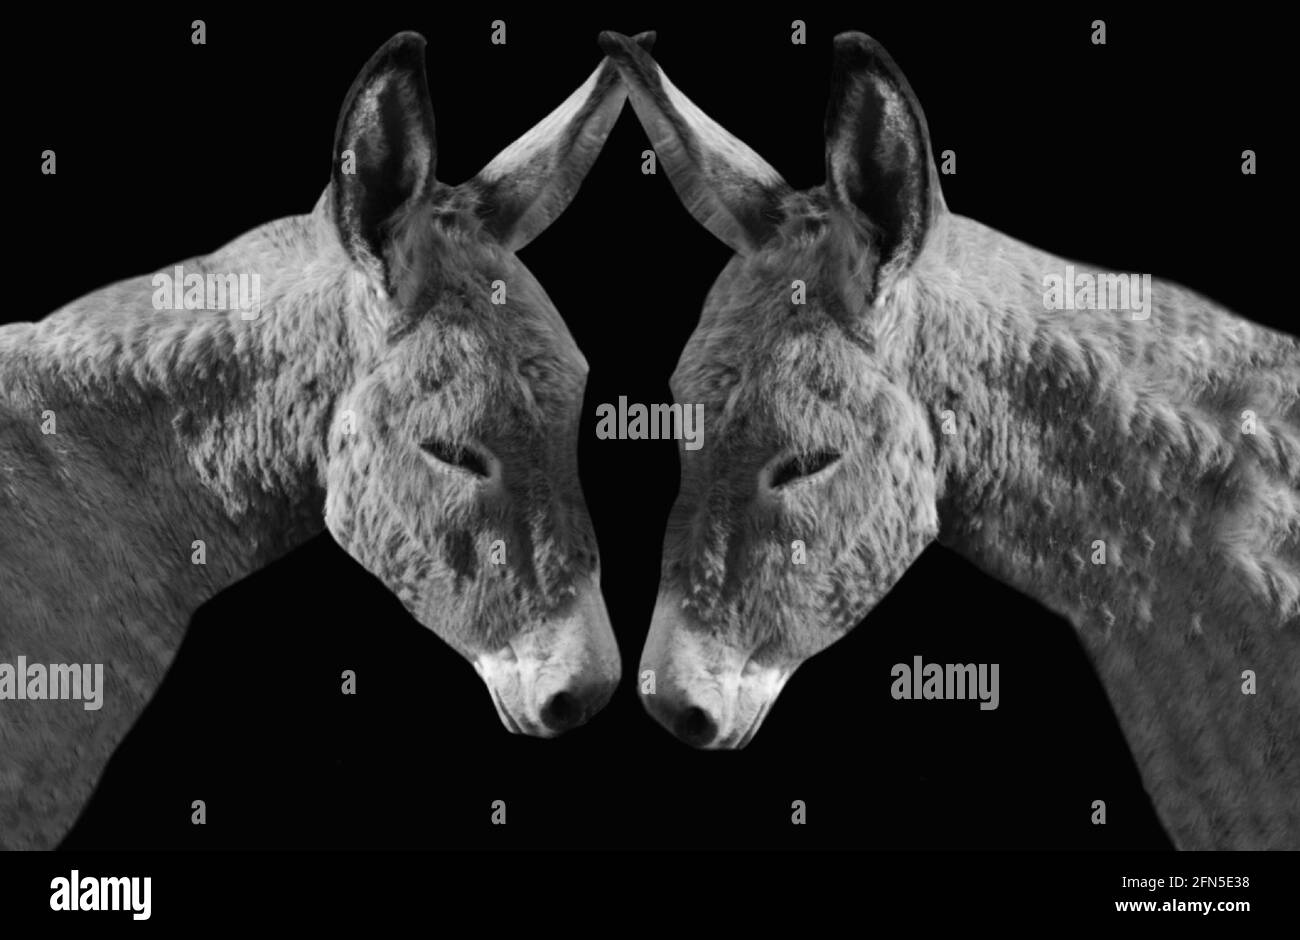 Two Donkey Closeup Face In The Black Background Stock Photo